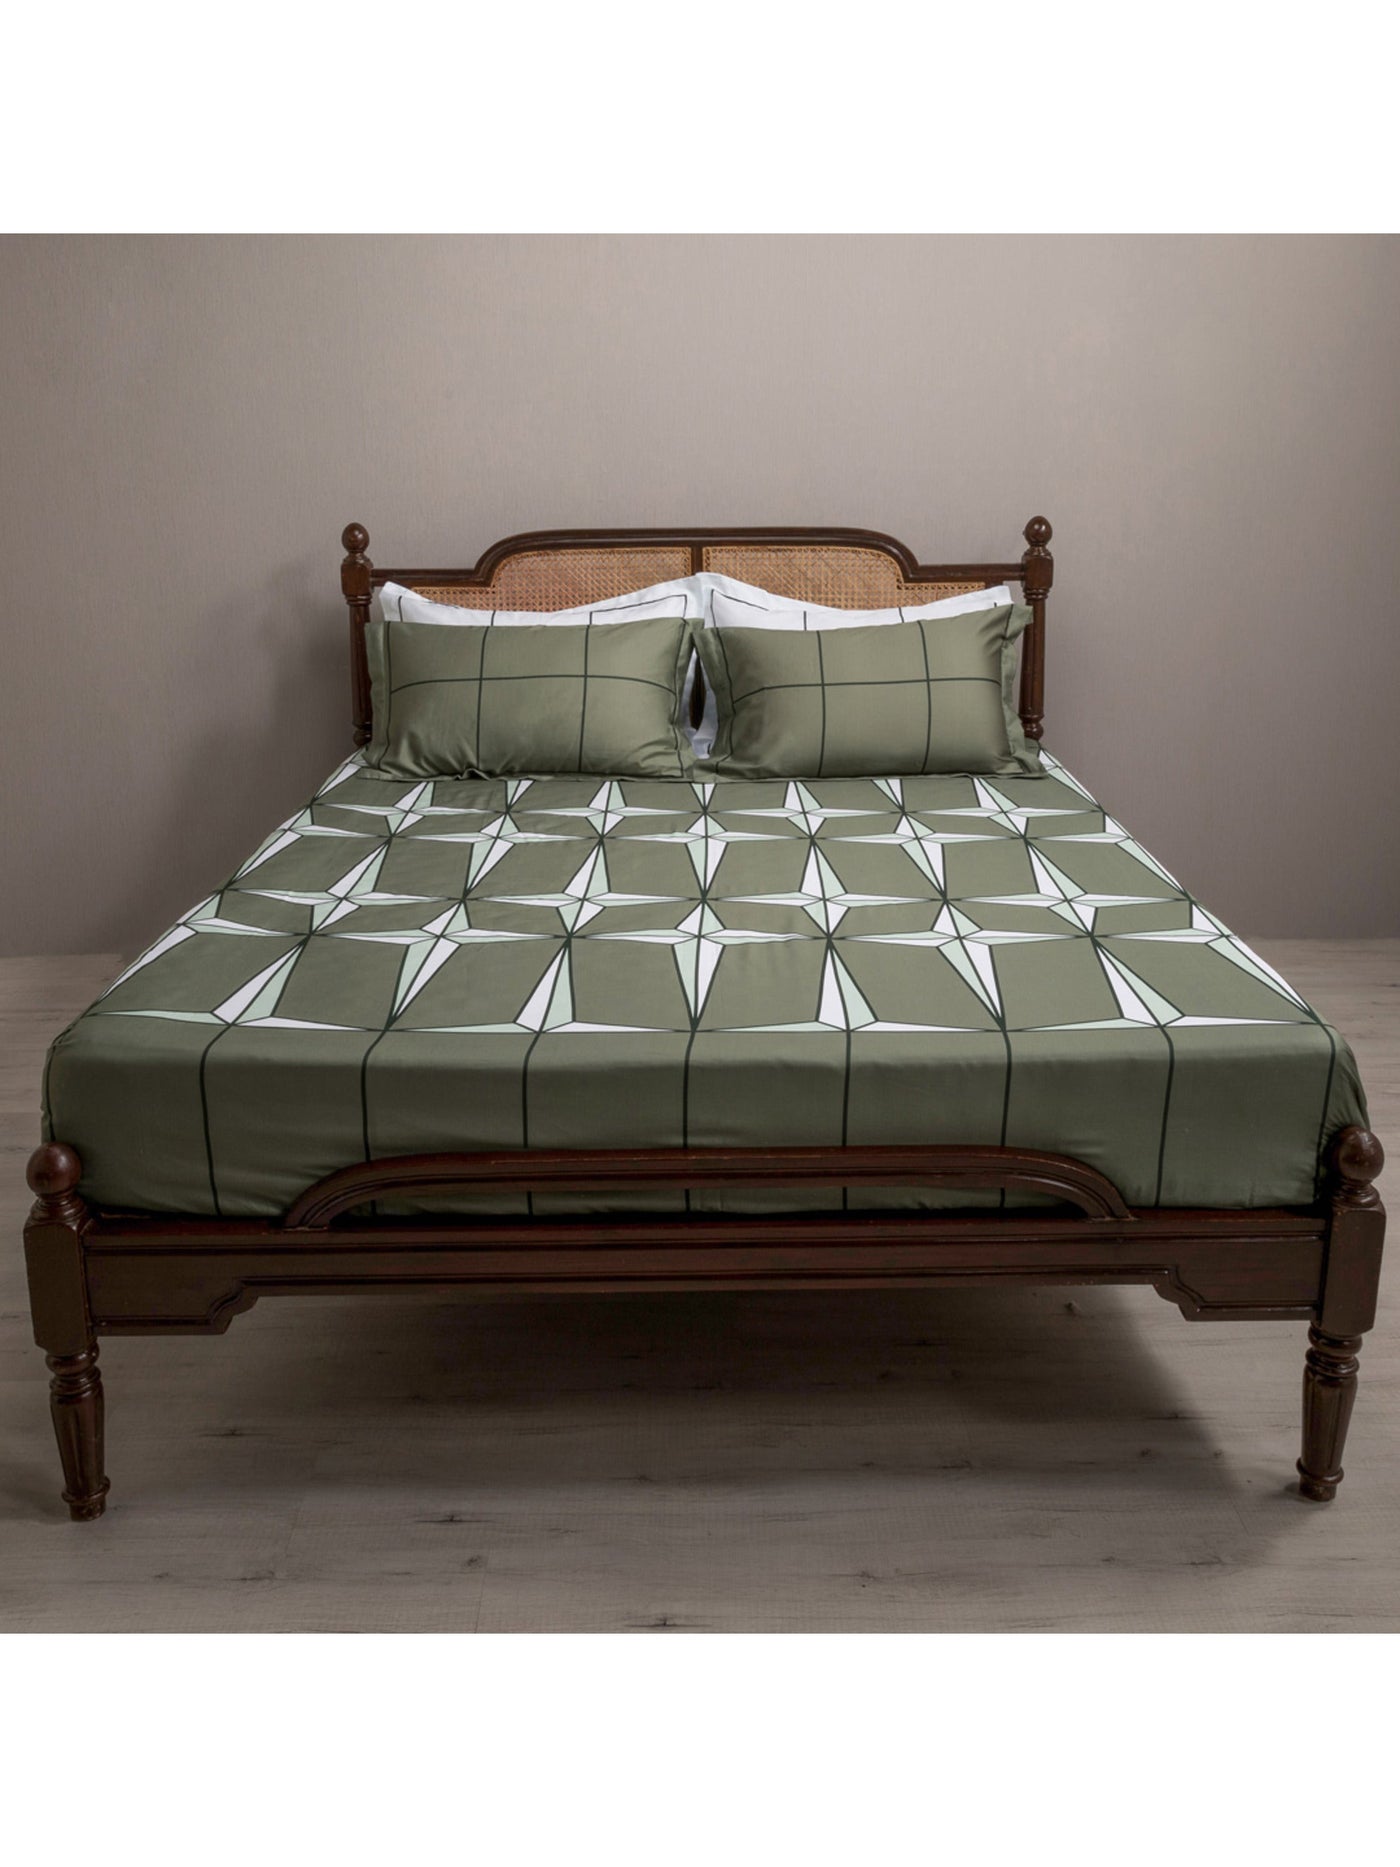 Bedsheet - The Holy Azulejos In Amazon Green